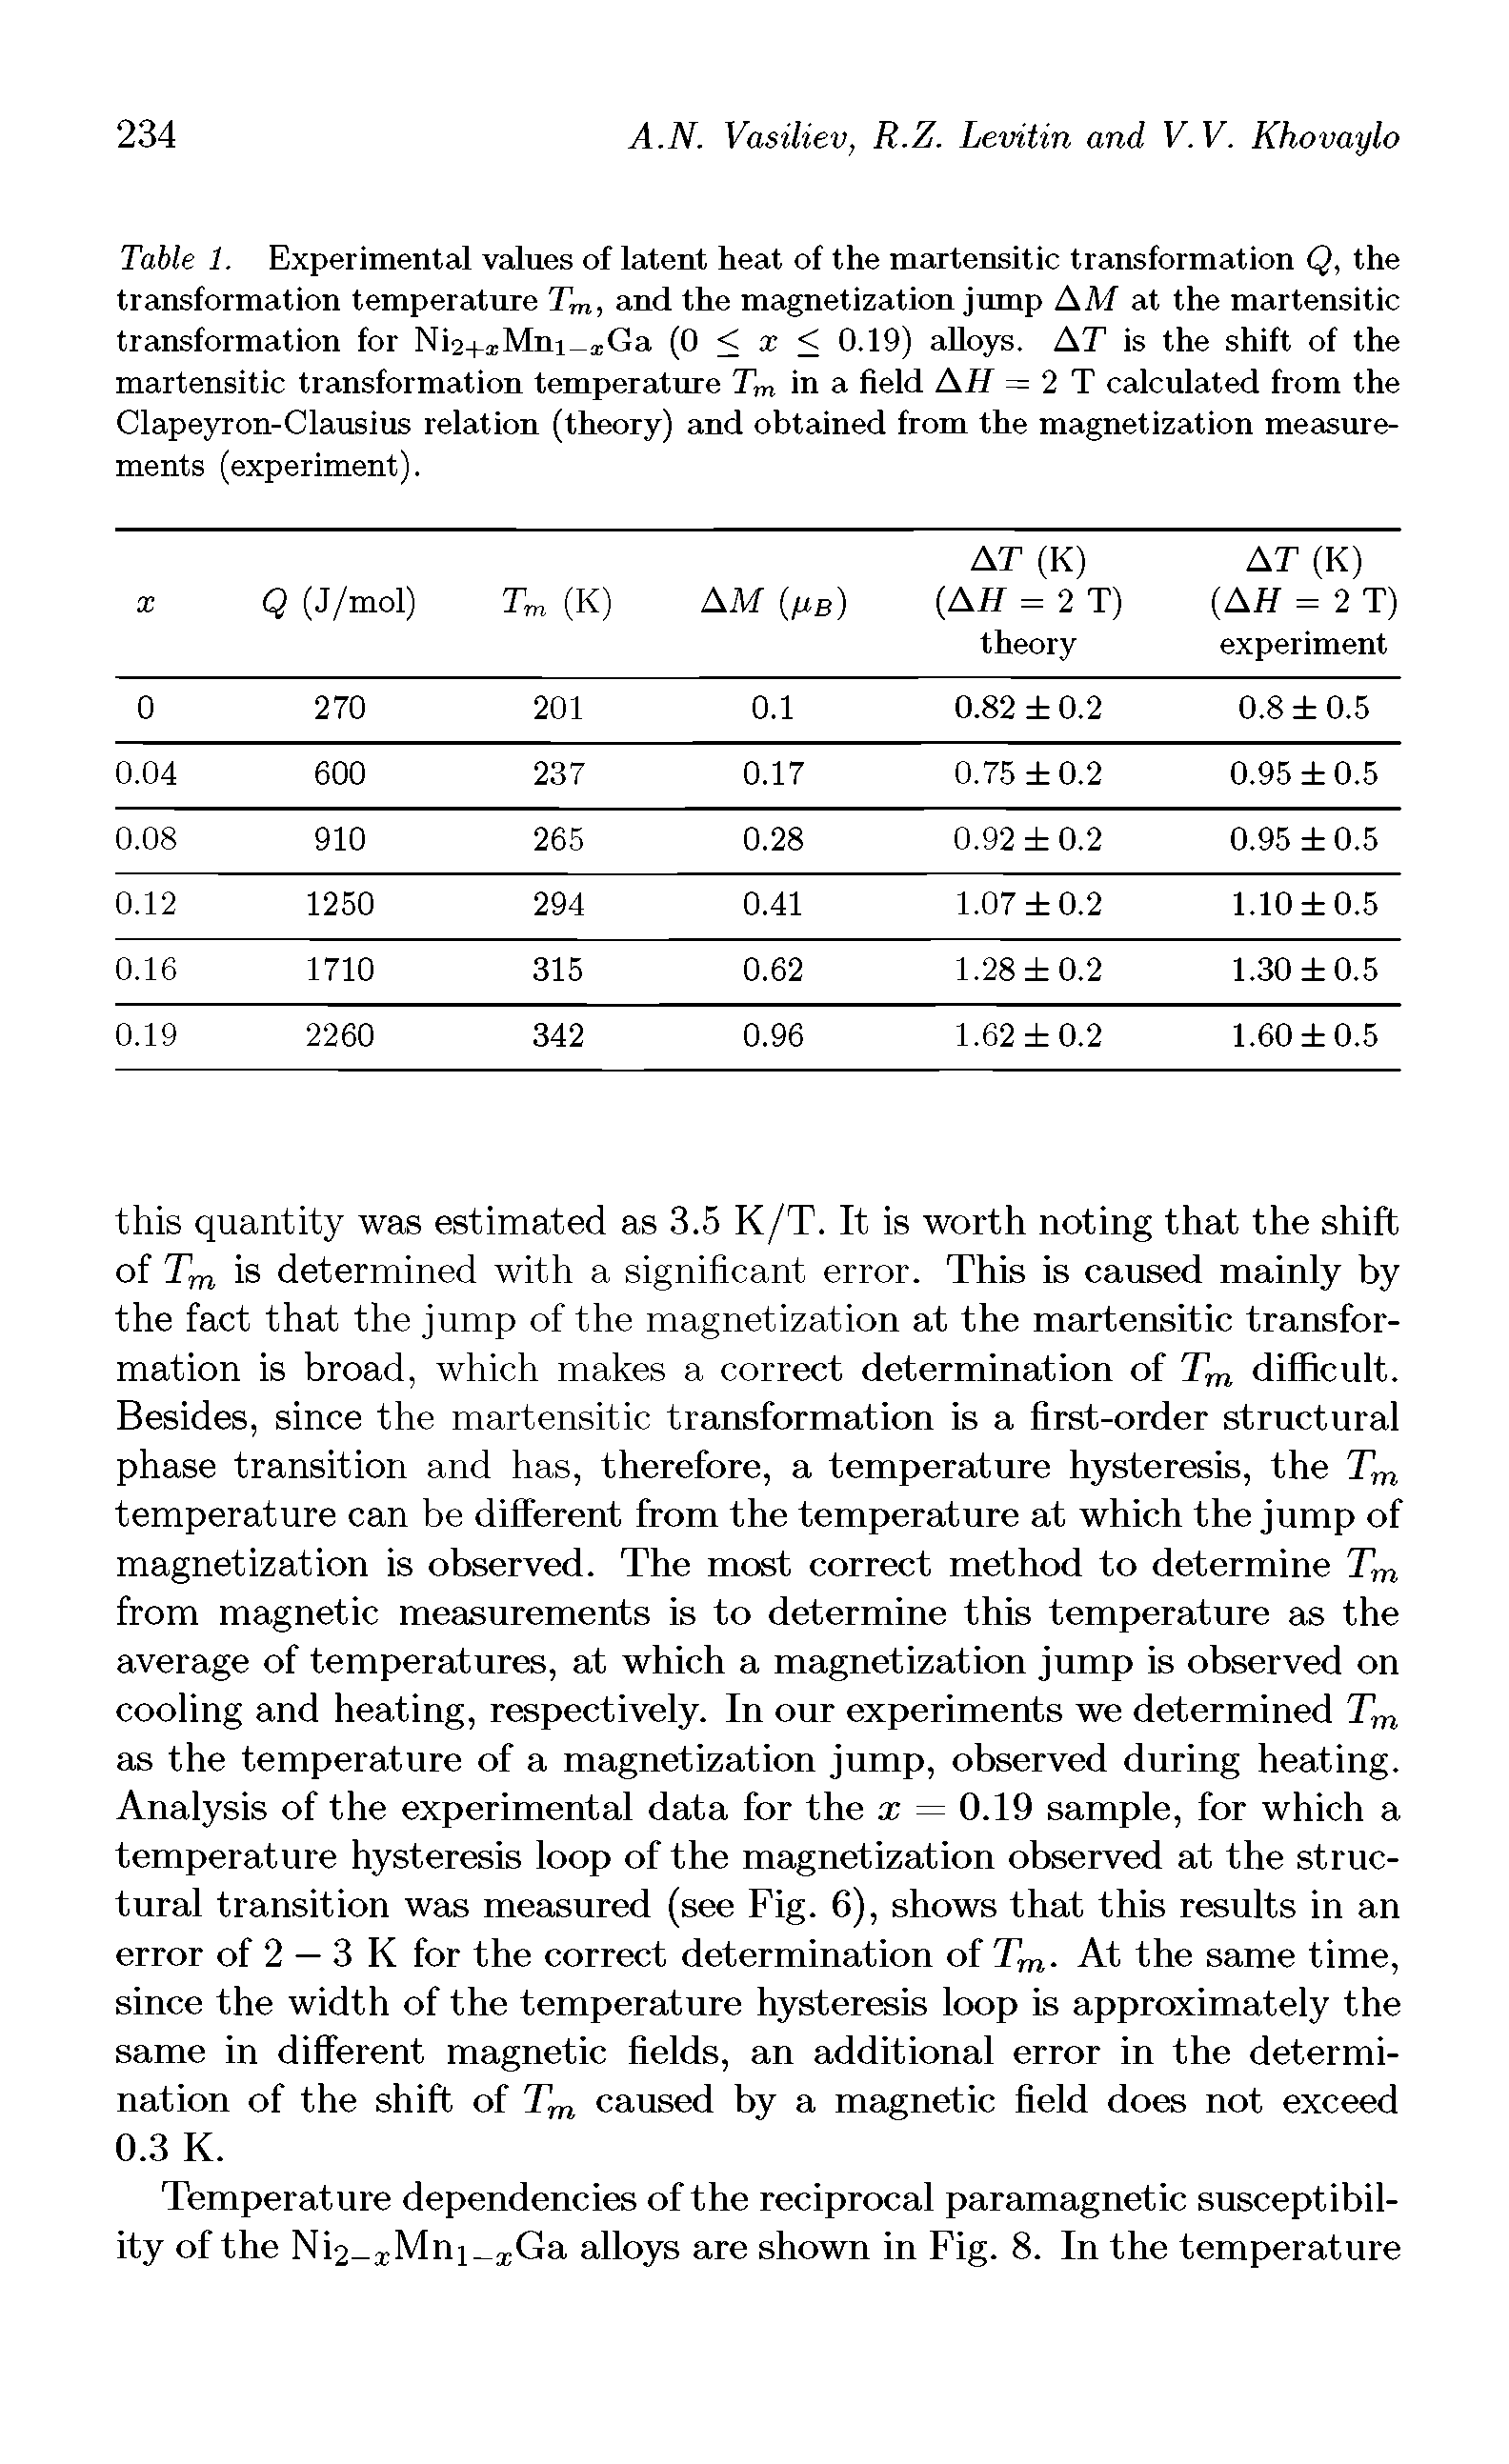 Table 1. Experimental values of latent heat of the martensitic transformation Q, the transformation temperature Tm, and the magnetization jump AM at the martensitic transformation for Nio tMrii T(ia (0 < x < 0.19) alloys. AT is the shift of the martensitic transformation temperature Tm in a field AH = 2 T calculated from the Clapeyron-Clausius relation (theory) and obtained from the magnetization measurements (experiment).